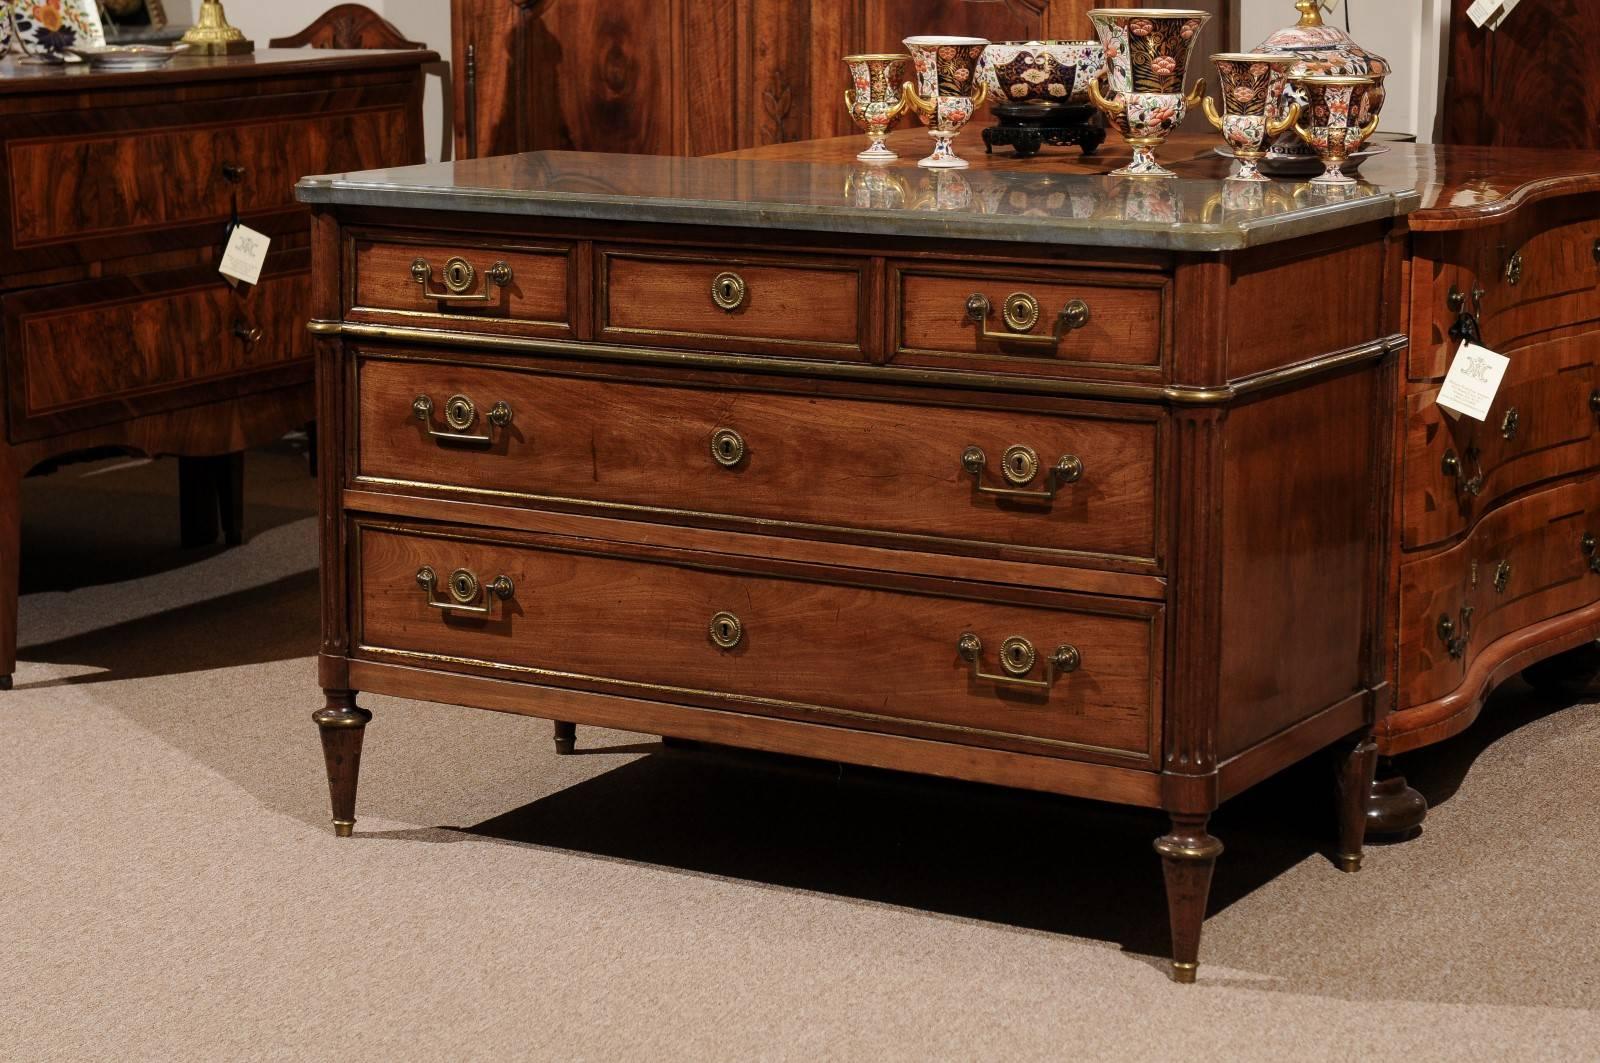 The Louis XVI commode in a medium walnut with grey marble top, rounded fluted corners flanking 3 short drawers and 2 long drawers below with brass pulls and brass inlay. All supported by turned tapered legs. 





